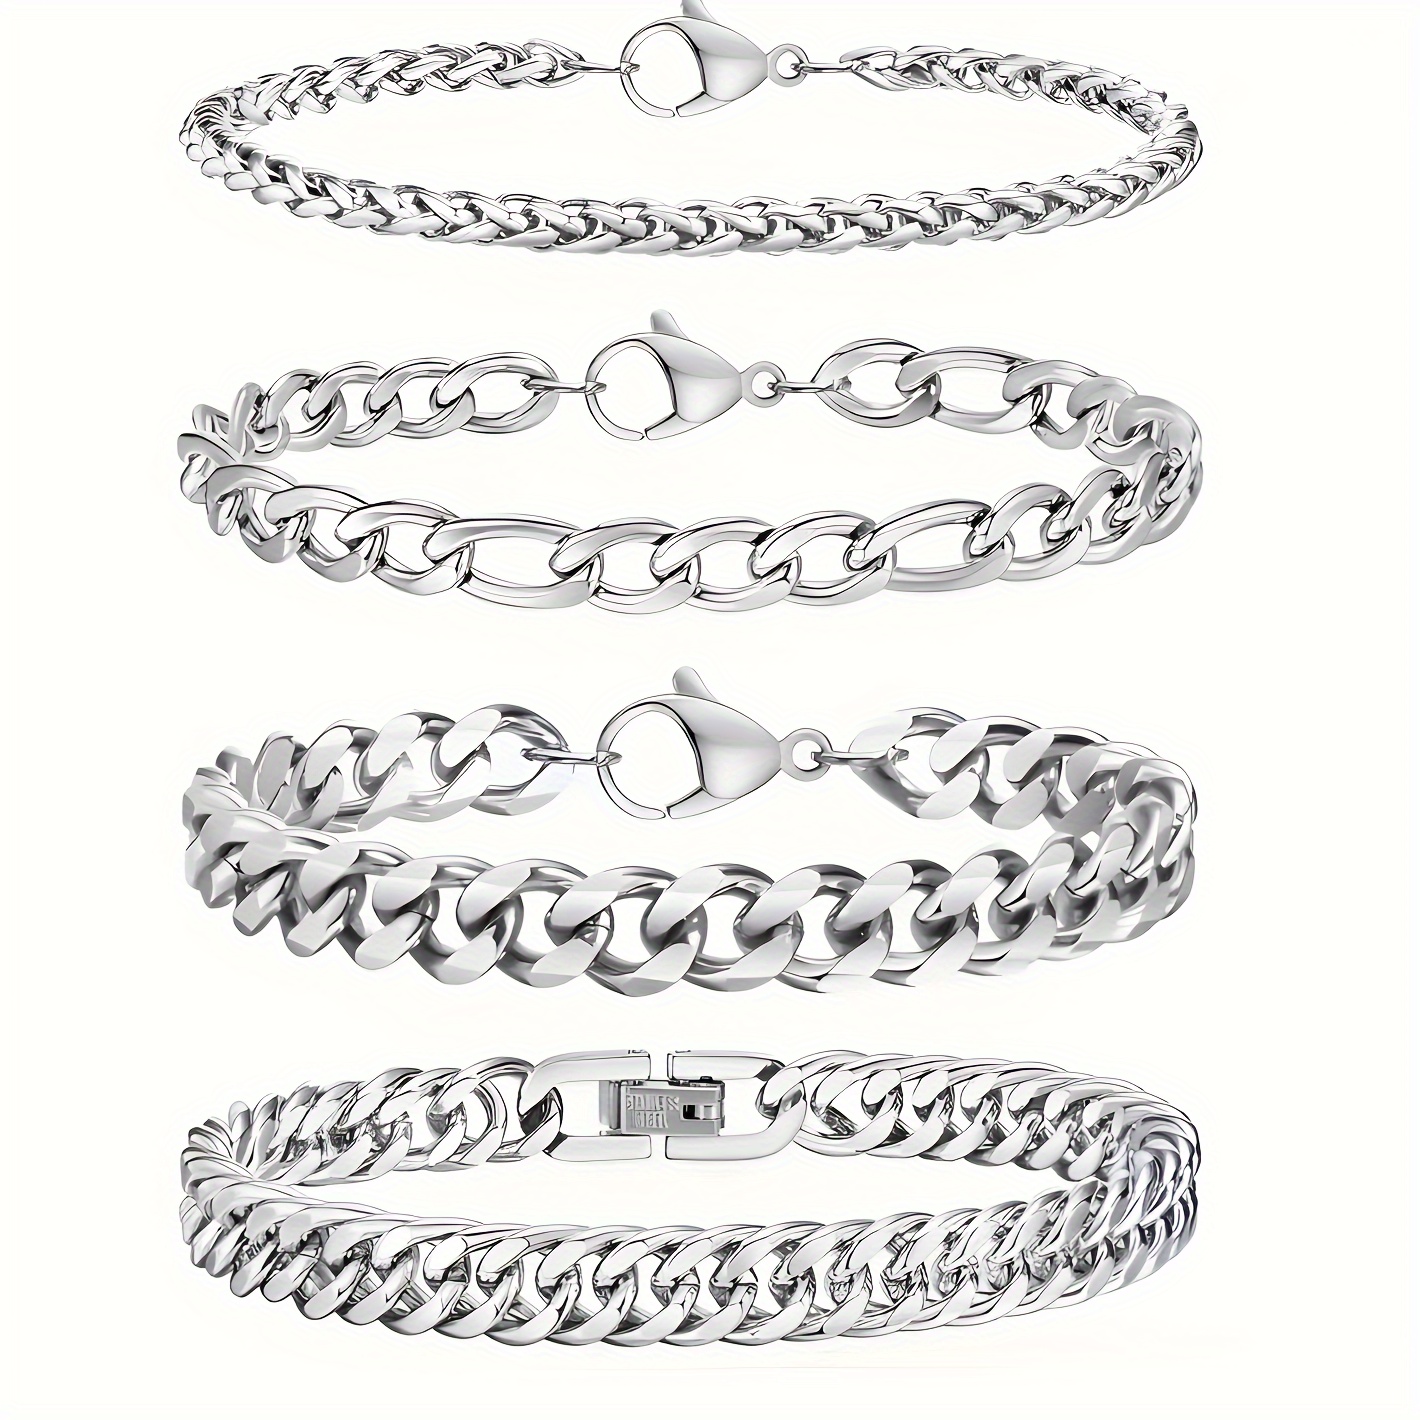 

4-piece Set Of Men's And Women's Bracelets - Sturdy Stainless Steel Wide Cuban Bracelet Set For Men's And Women's, 6.69/7.5/8.2/9 Inches